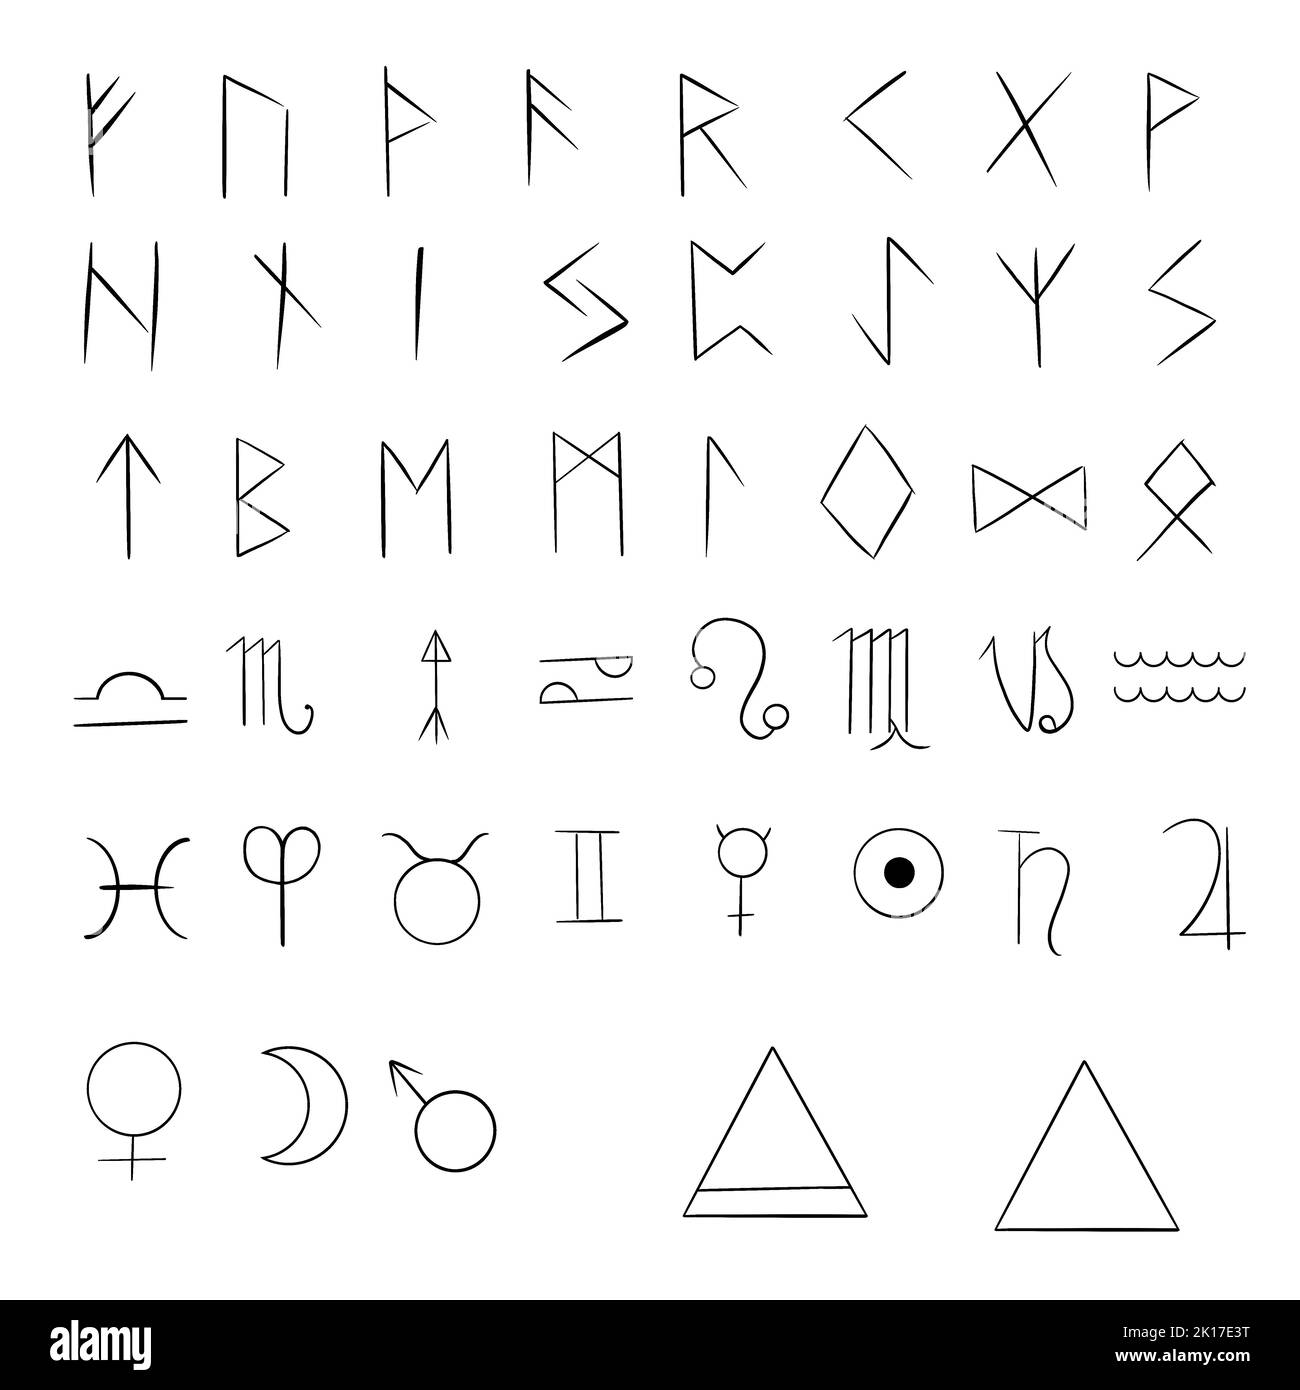 Ancient Symbols Meanings